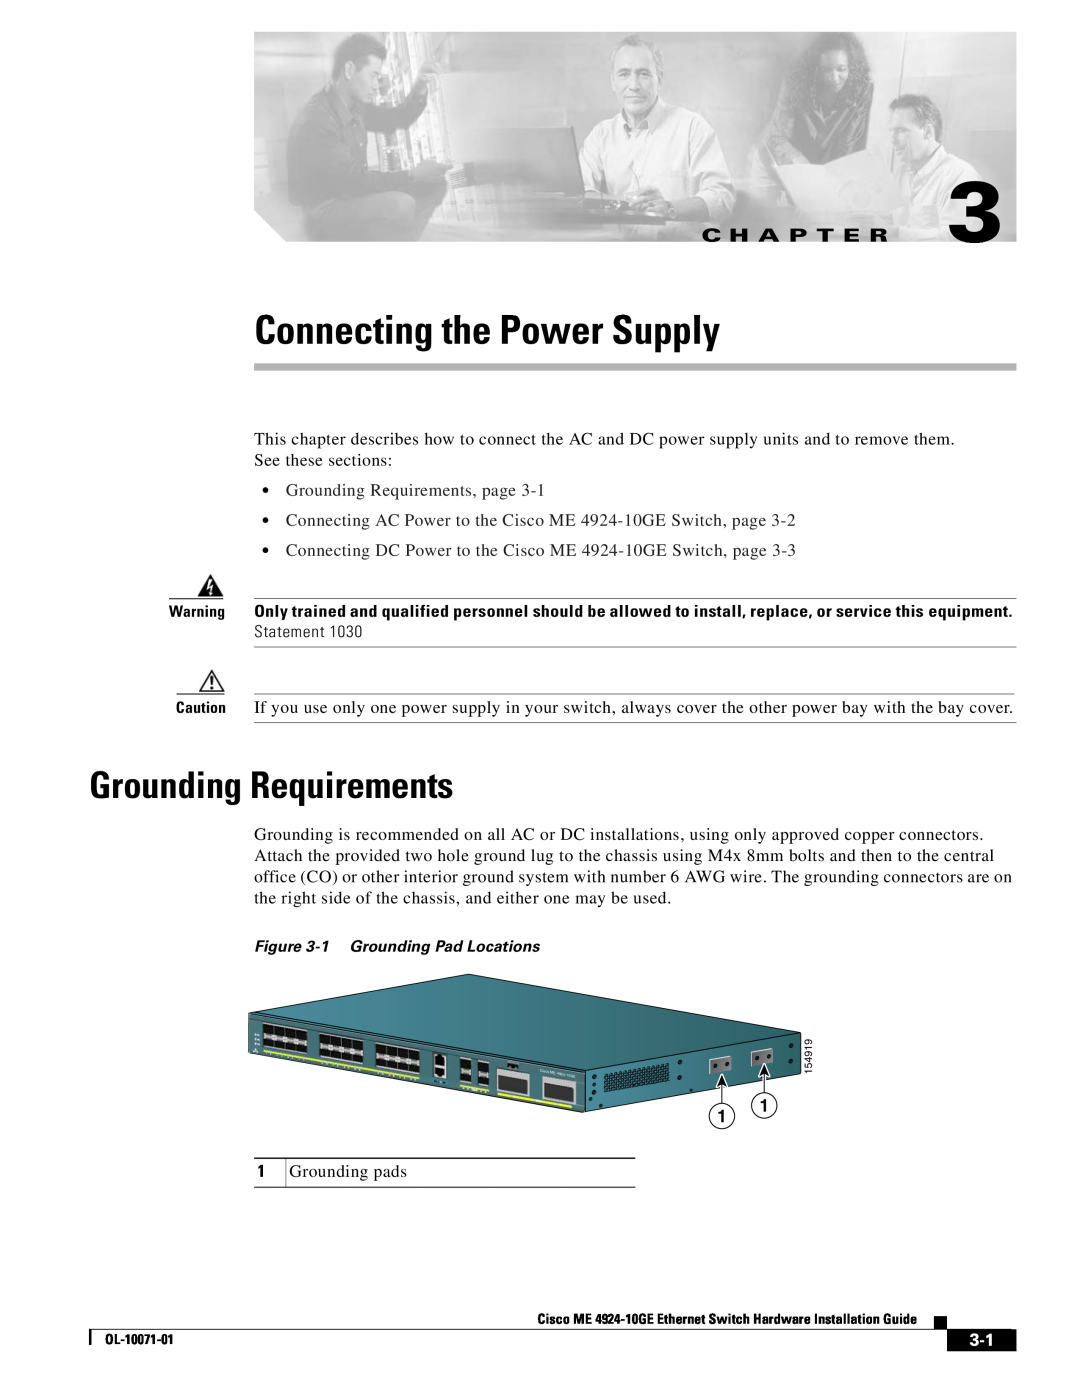 Cisco Systems ME 4924-10GE manual Connecting the Power Supply, Grounding Requirements, page, C H A P T E R 